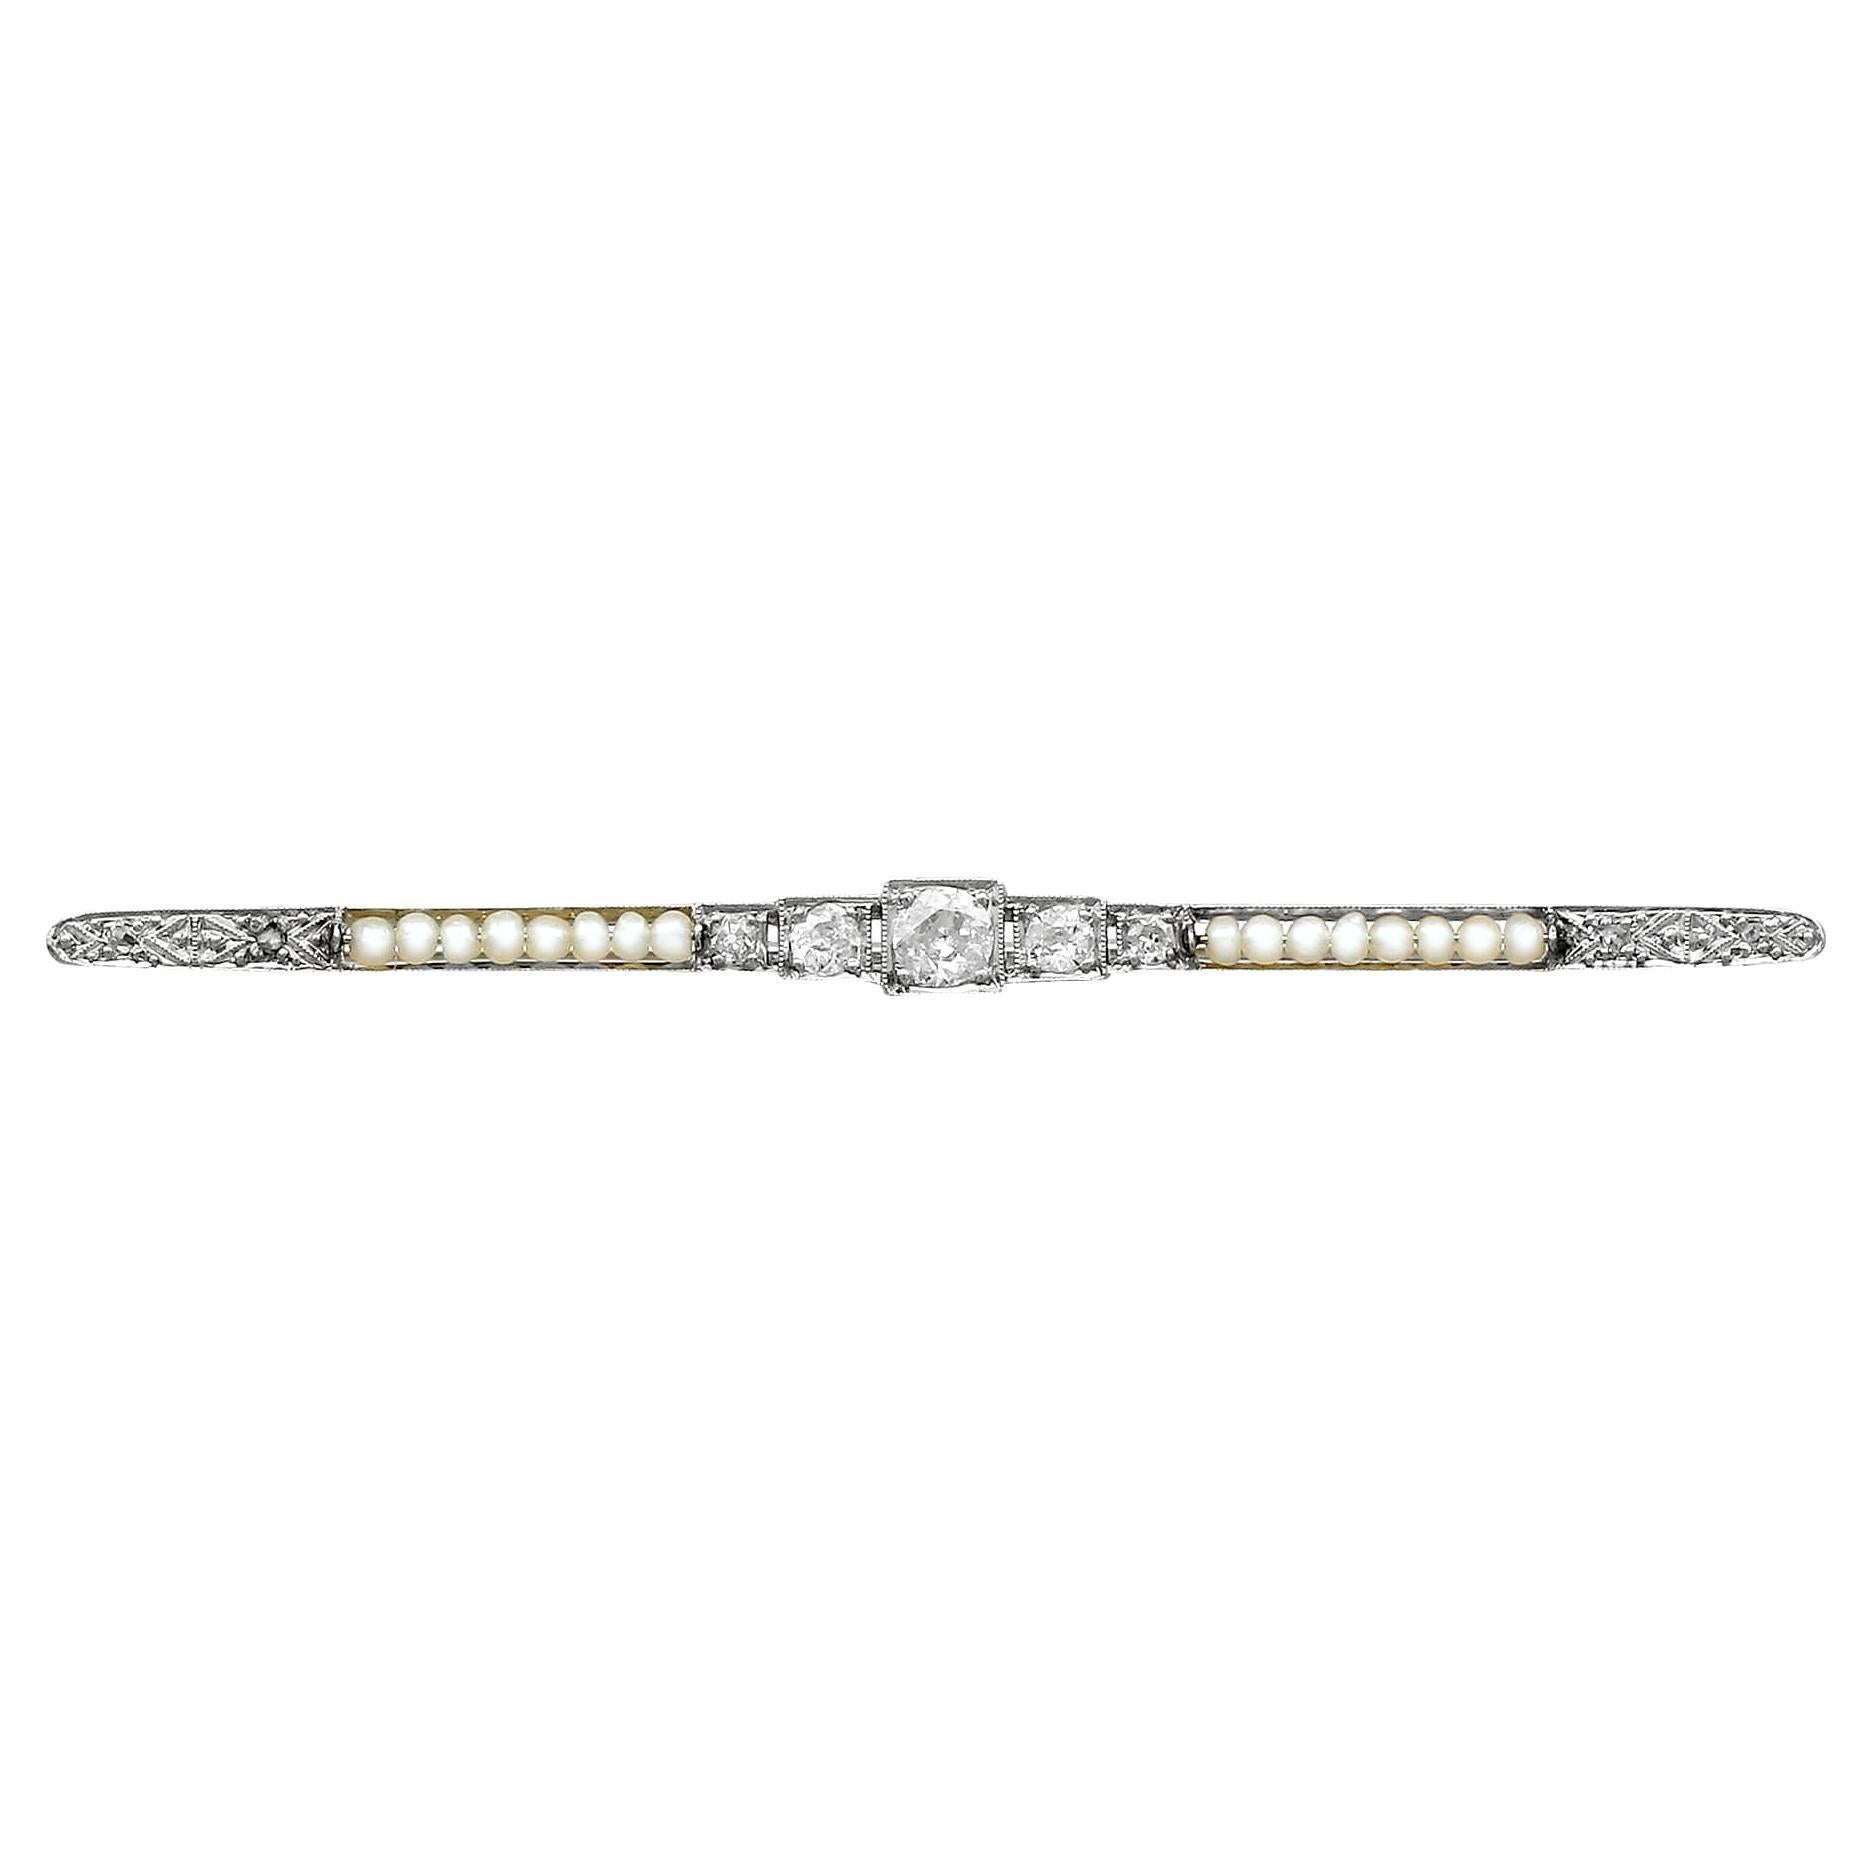 Antique Diamond and Seed Pearl White Gold Bar Brooch